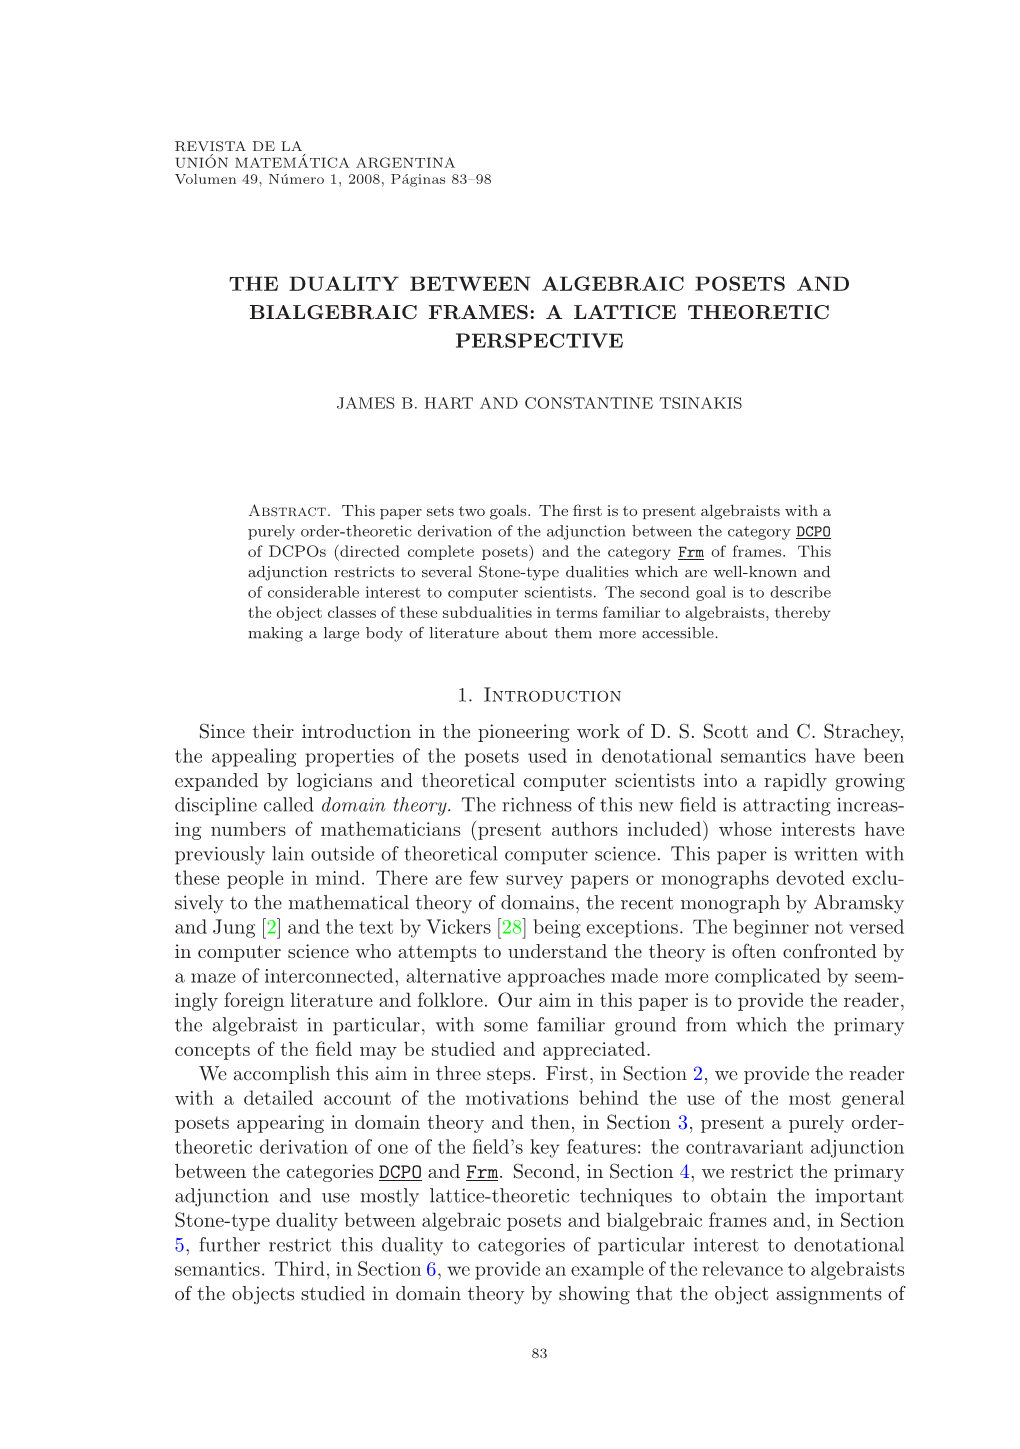 The Duality Between Algebraic Posets and Bialgebraic Frames: a Lattice Theoretic Perspective